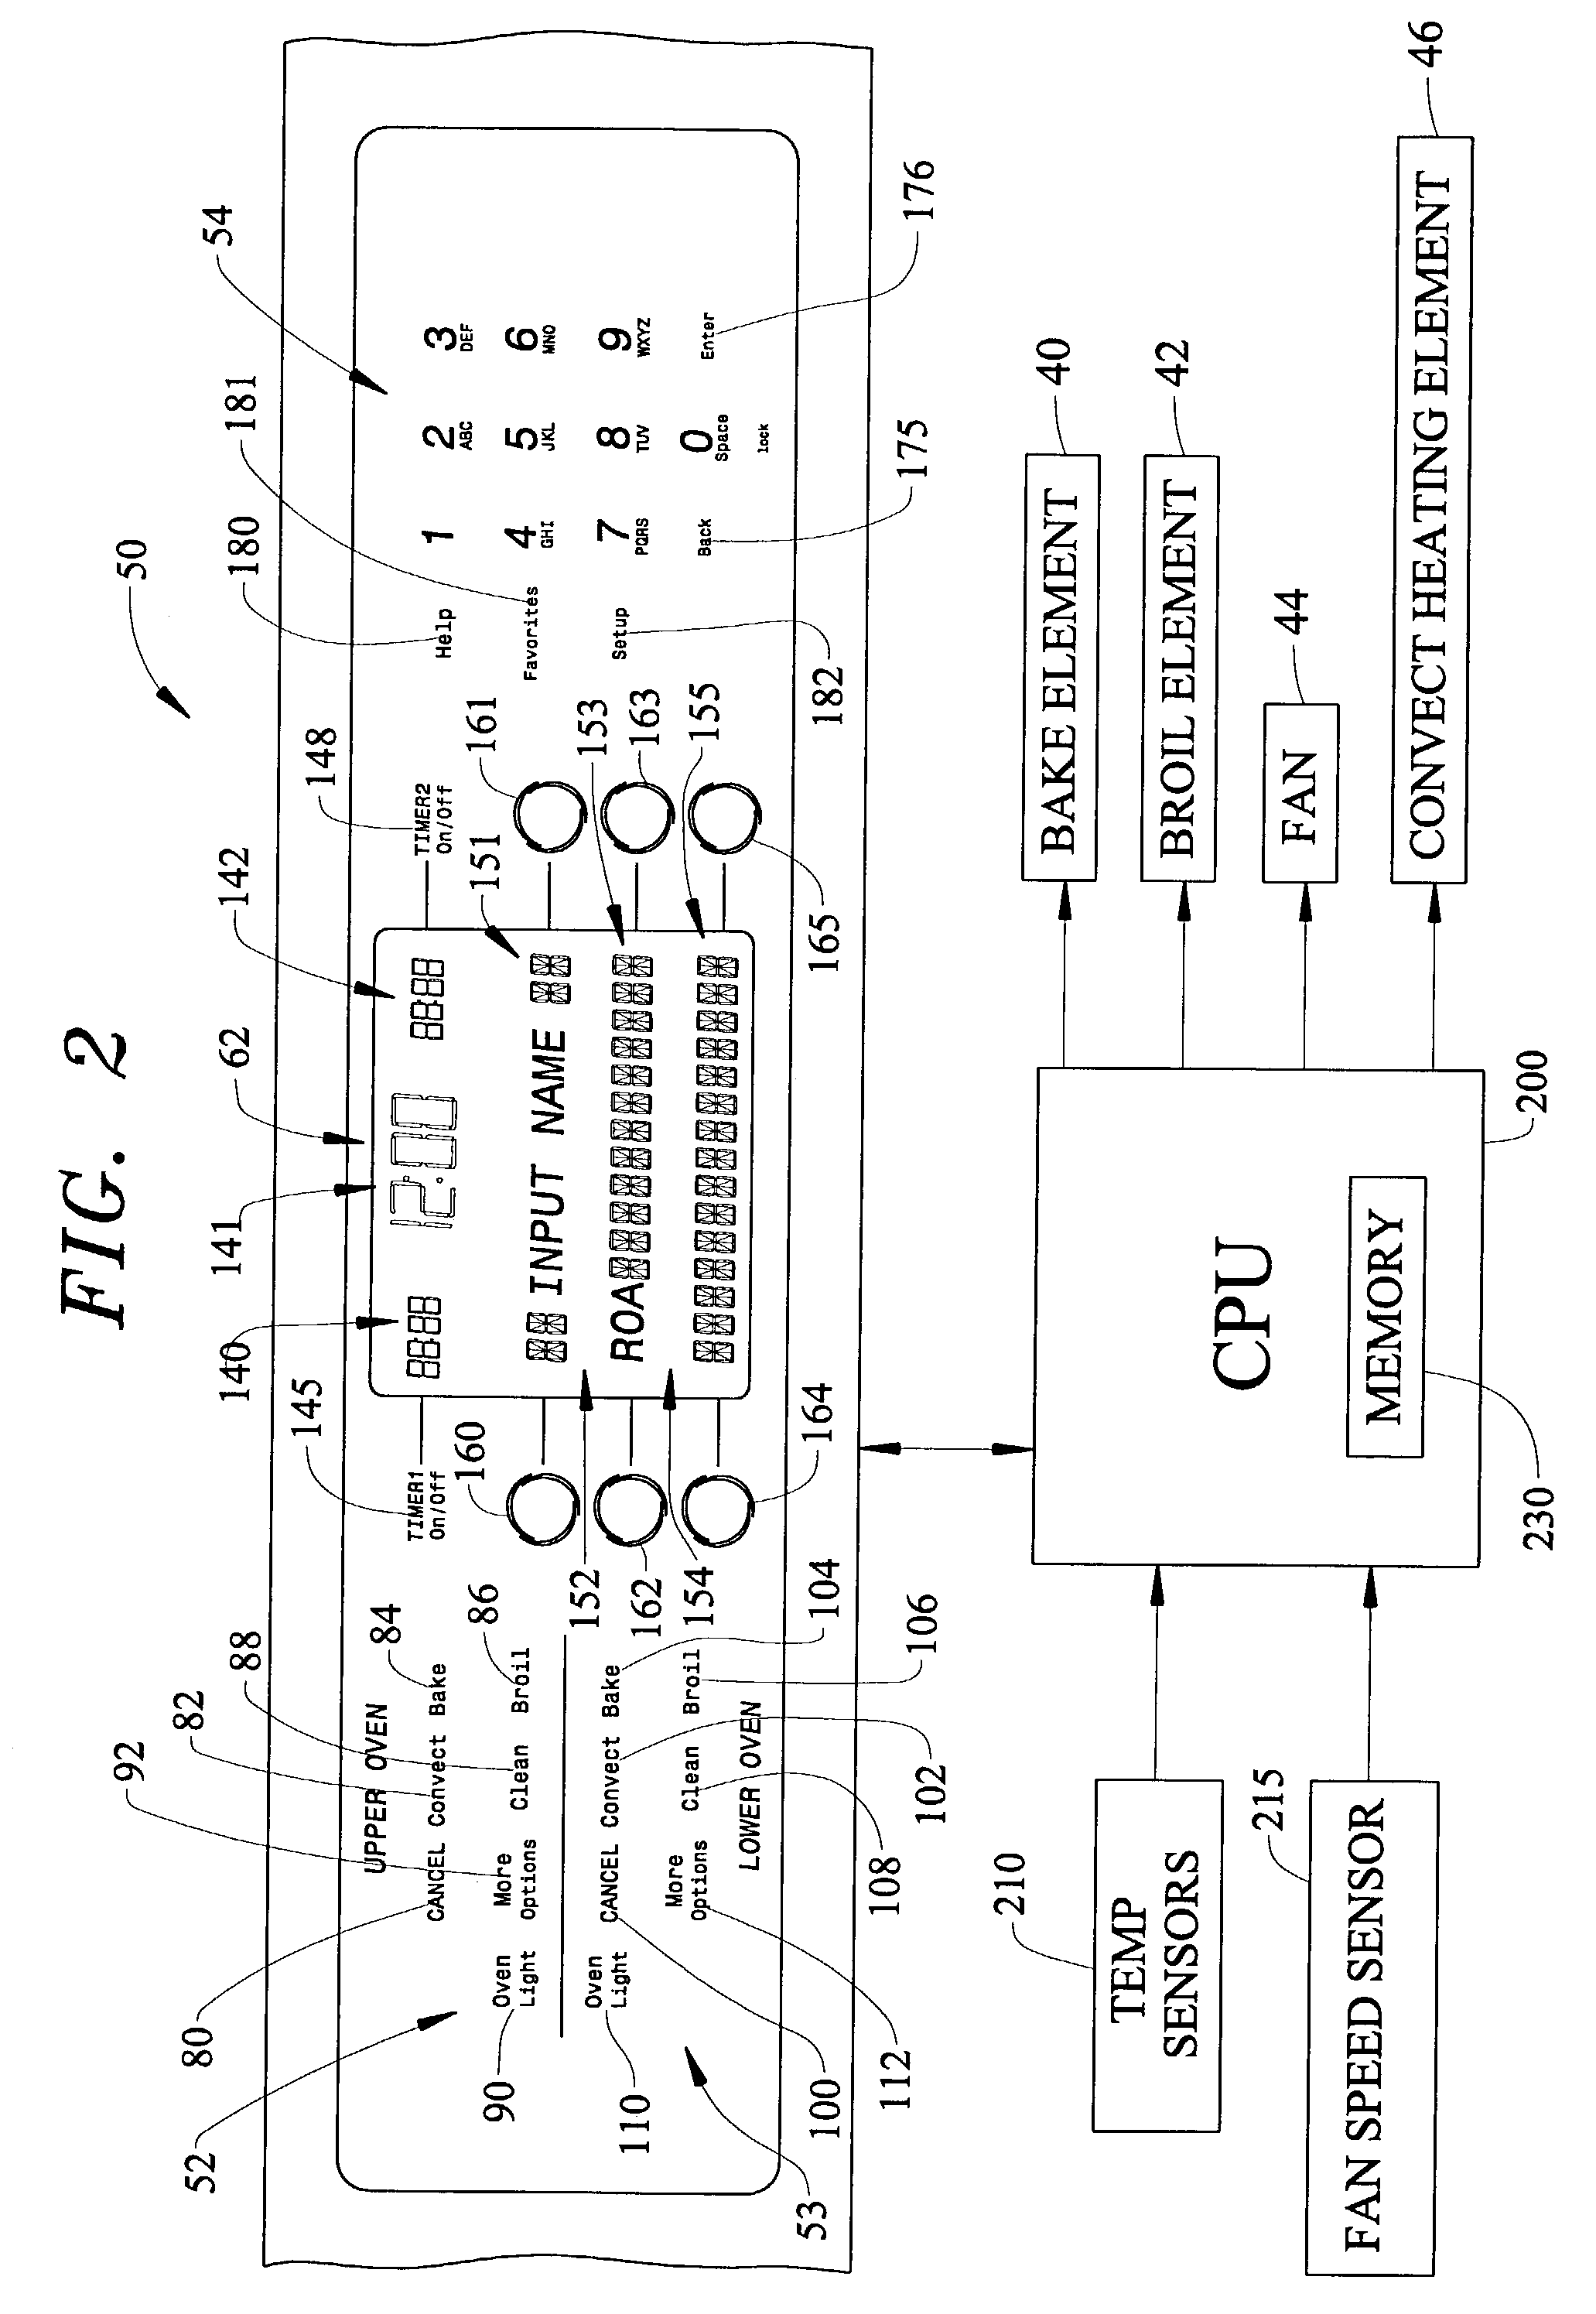 Alpha-numeric data entry and display for electronic oven control system